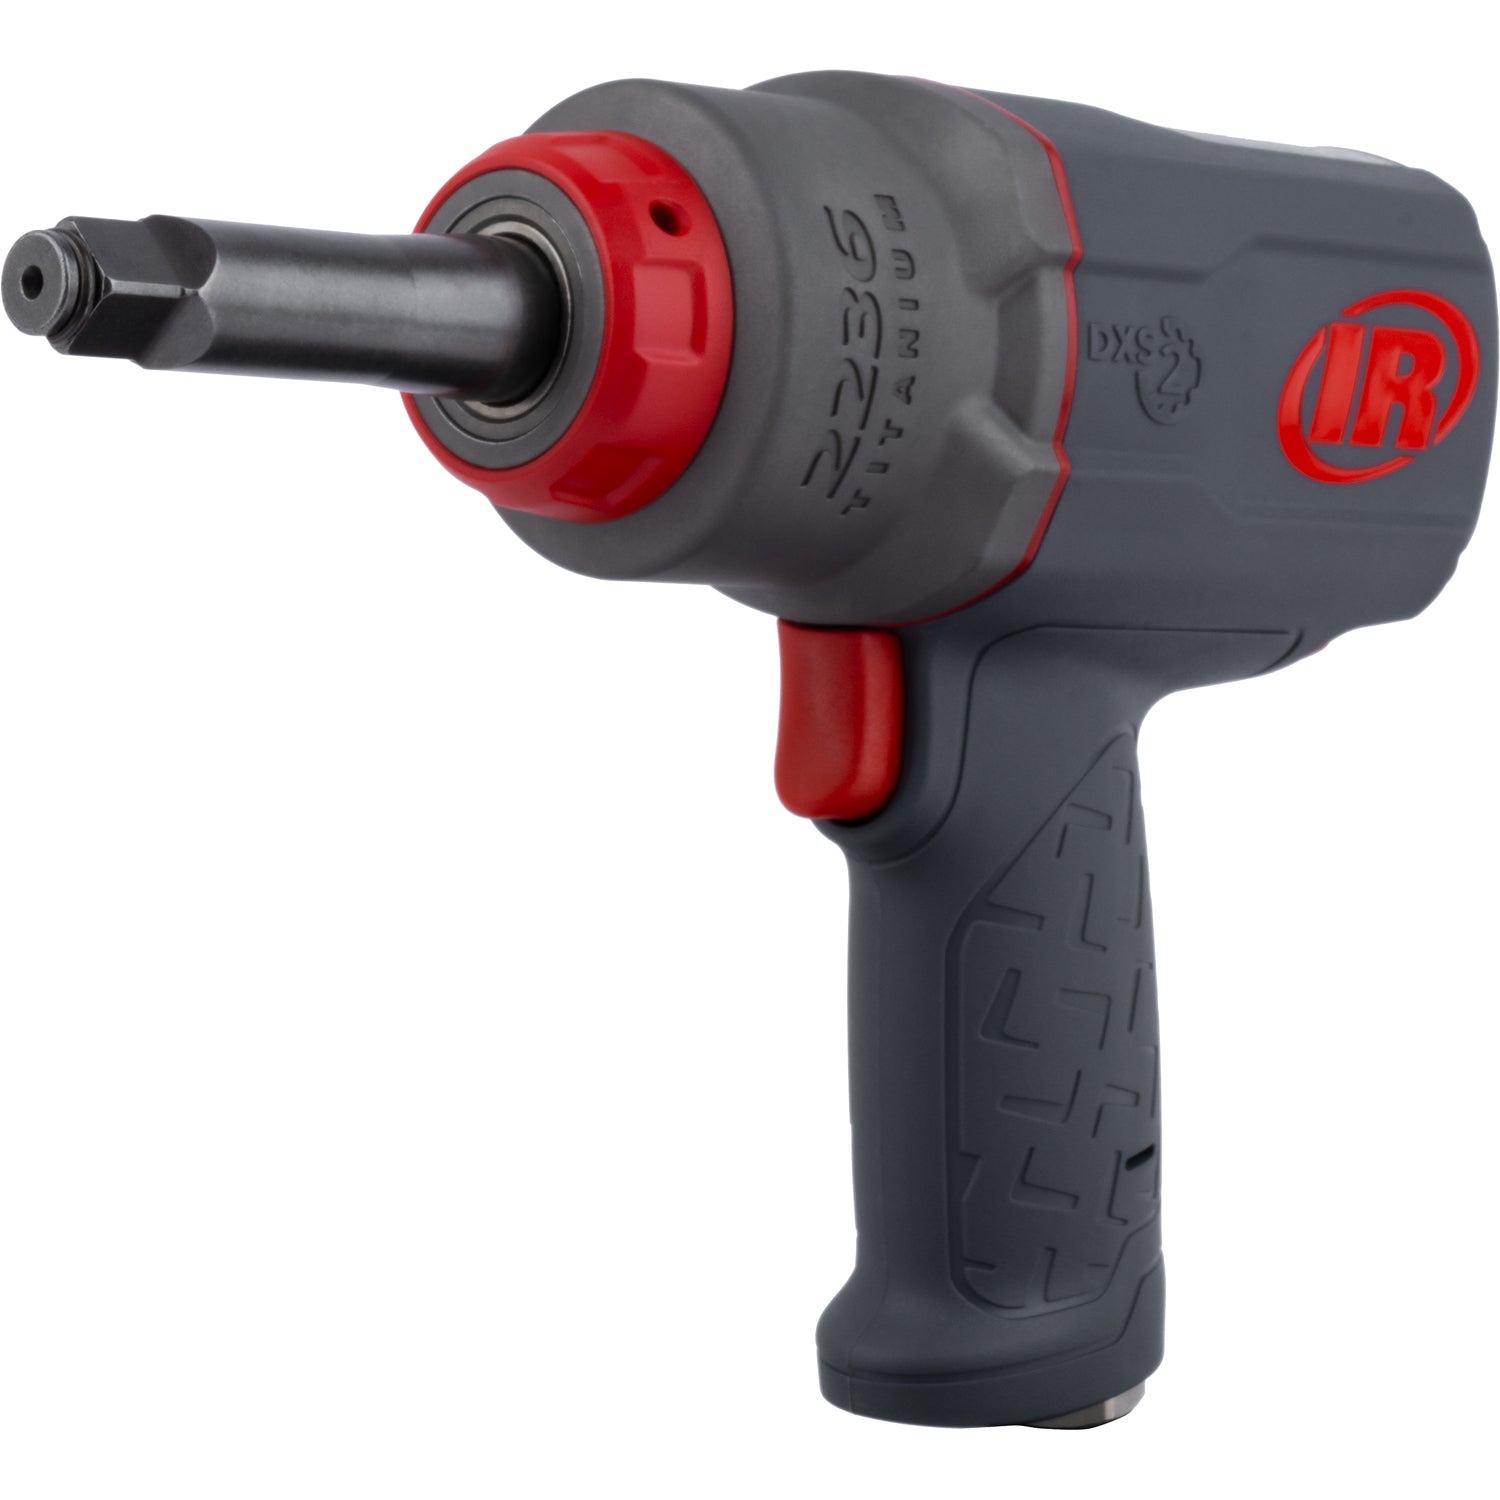 Ingersoll Rand 2236TIMAX2 1/2" Pneumatic DXS 2 Impact Wrench with 2" Shank 1500 Ft/Lb